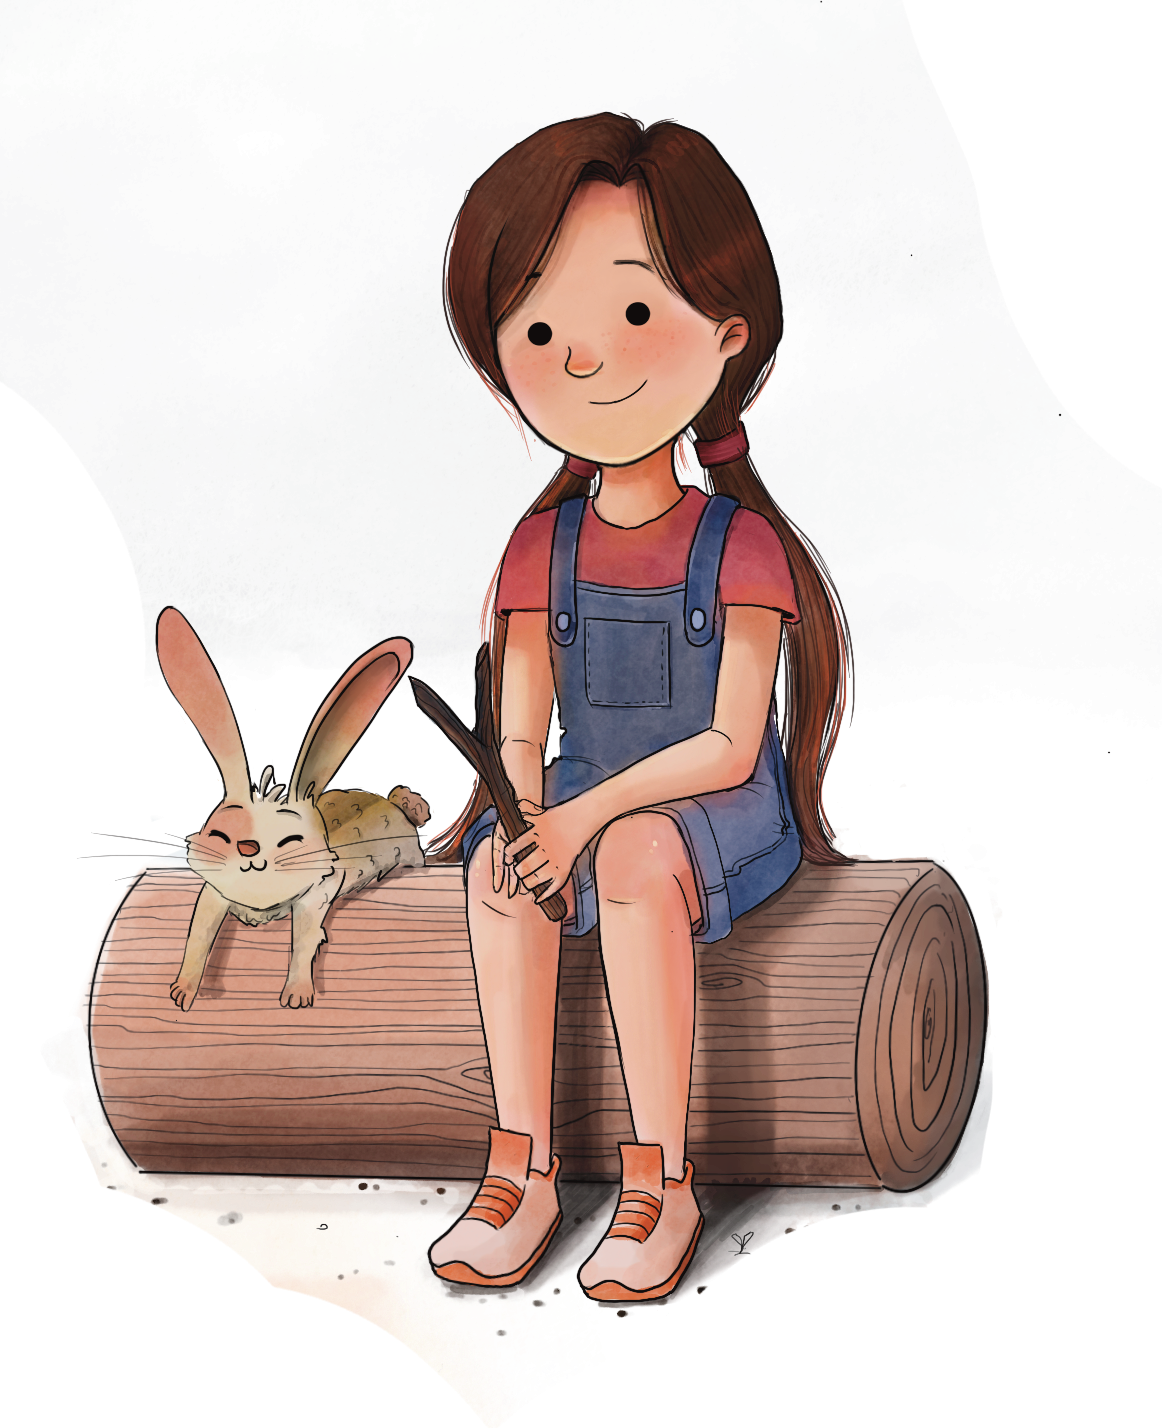 Ella and her bunny sitting on a log in Ella's Aussie Adventures Book 2 by Sheree Chambers